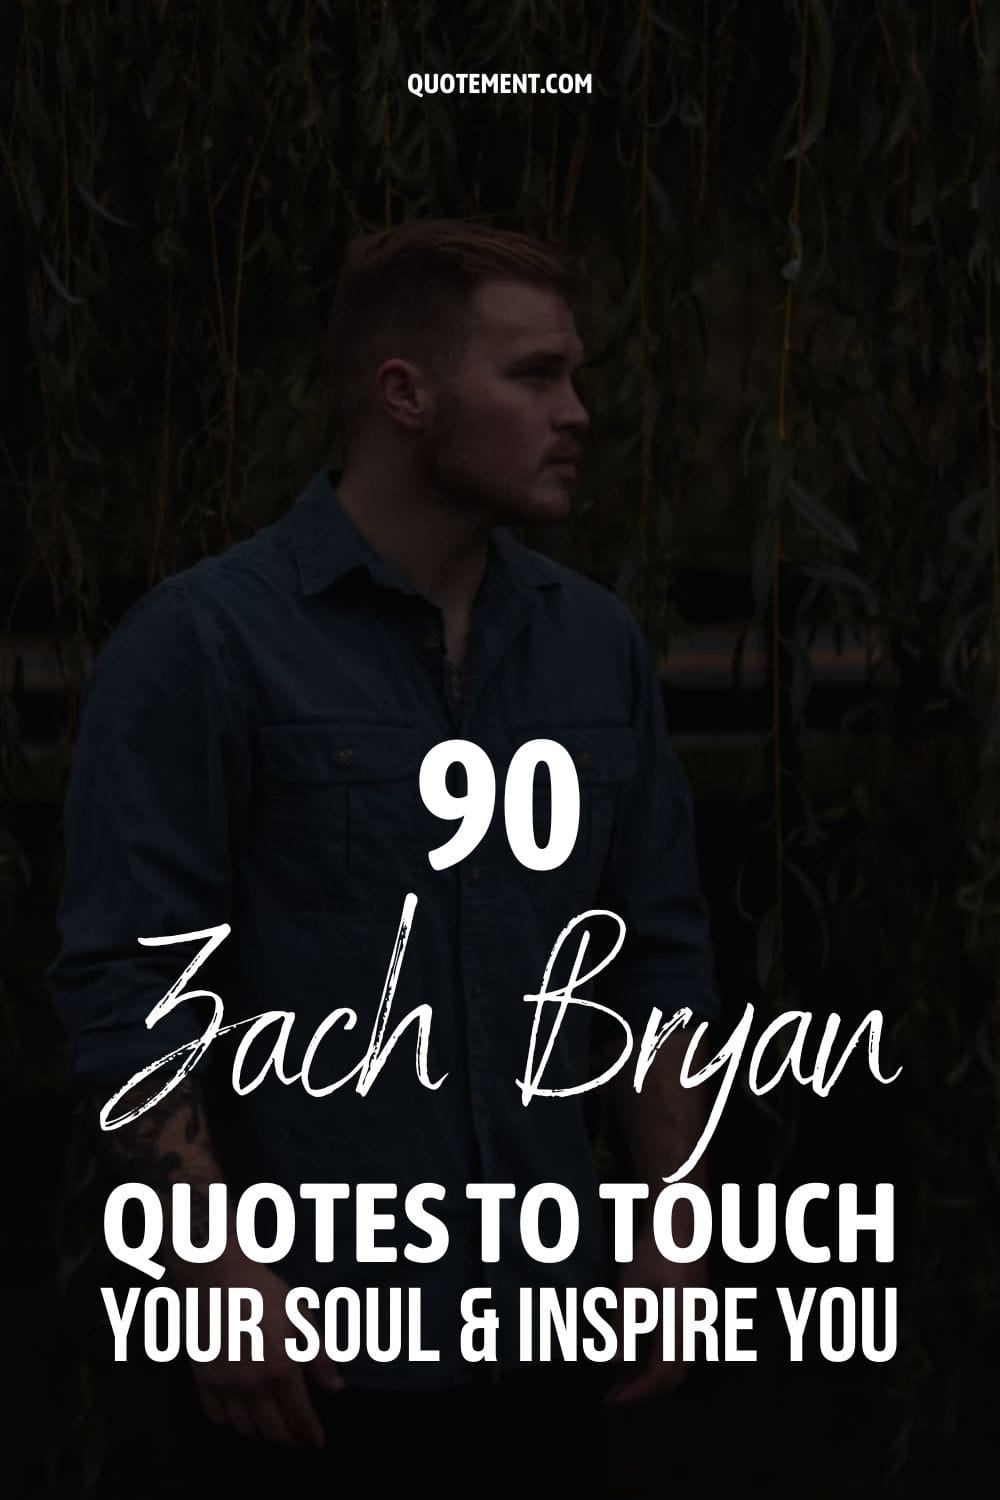 90 Zach Bryan Quotes To Touch Your Soul And Inspire You 